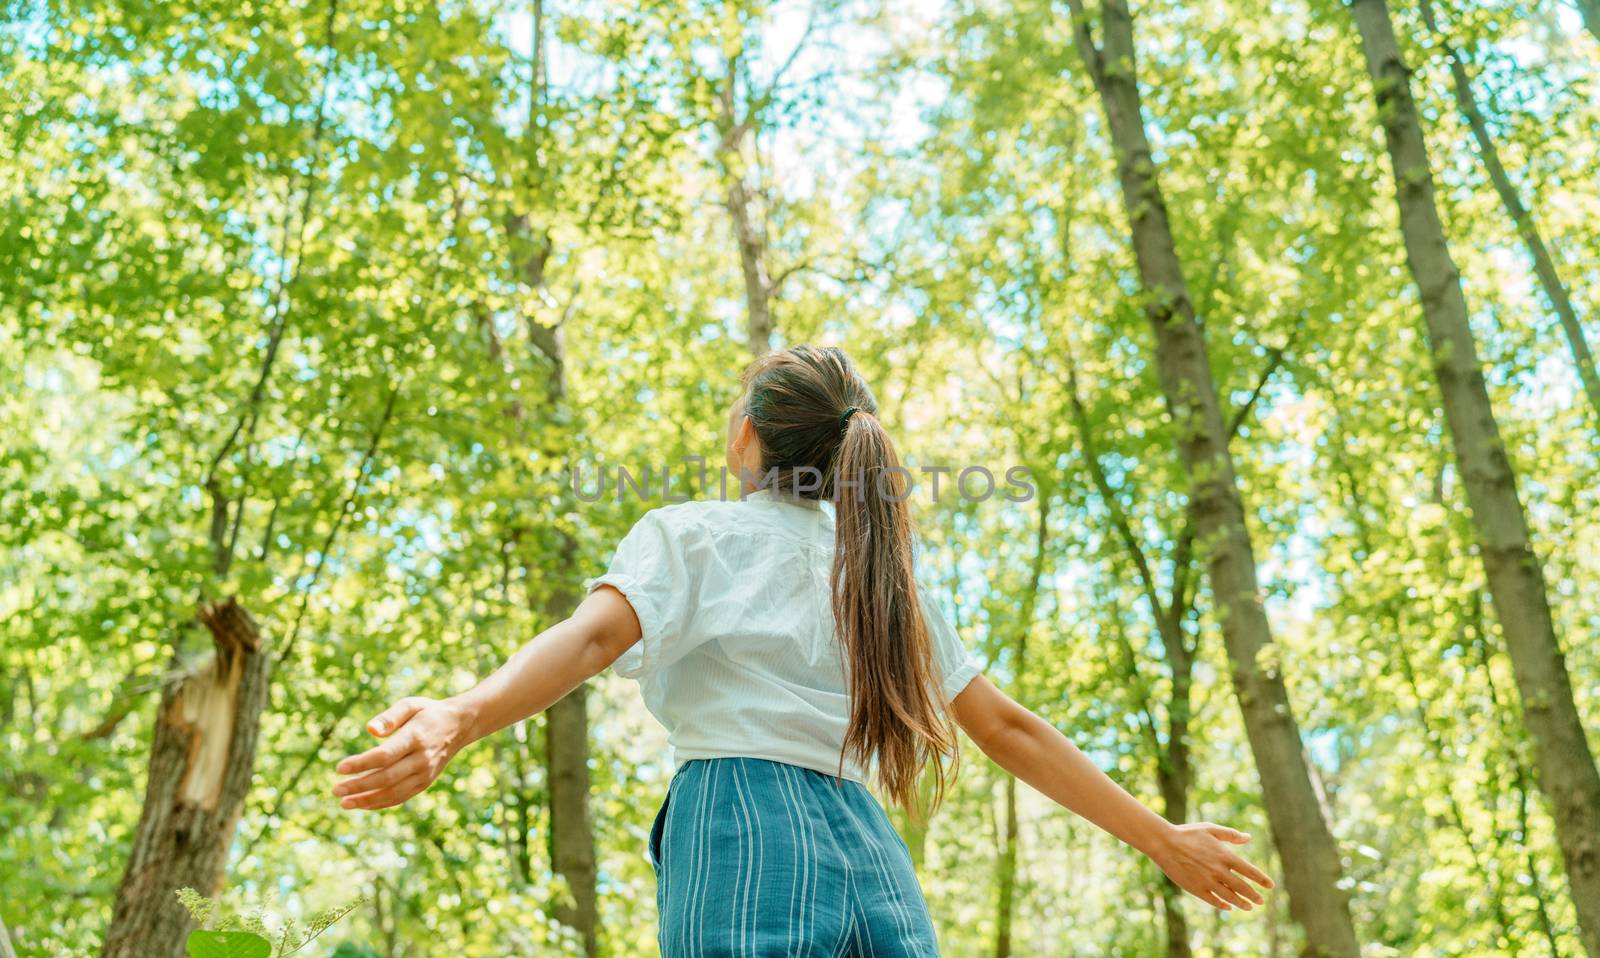 Free woman breathing clean air in nature forest. Happy girl from the back with open arms in happiness. Fresh outdoor woods, wellness healthy lifestyle concept by Maridav